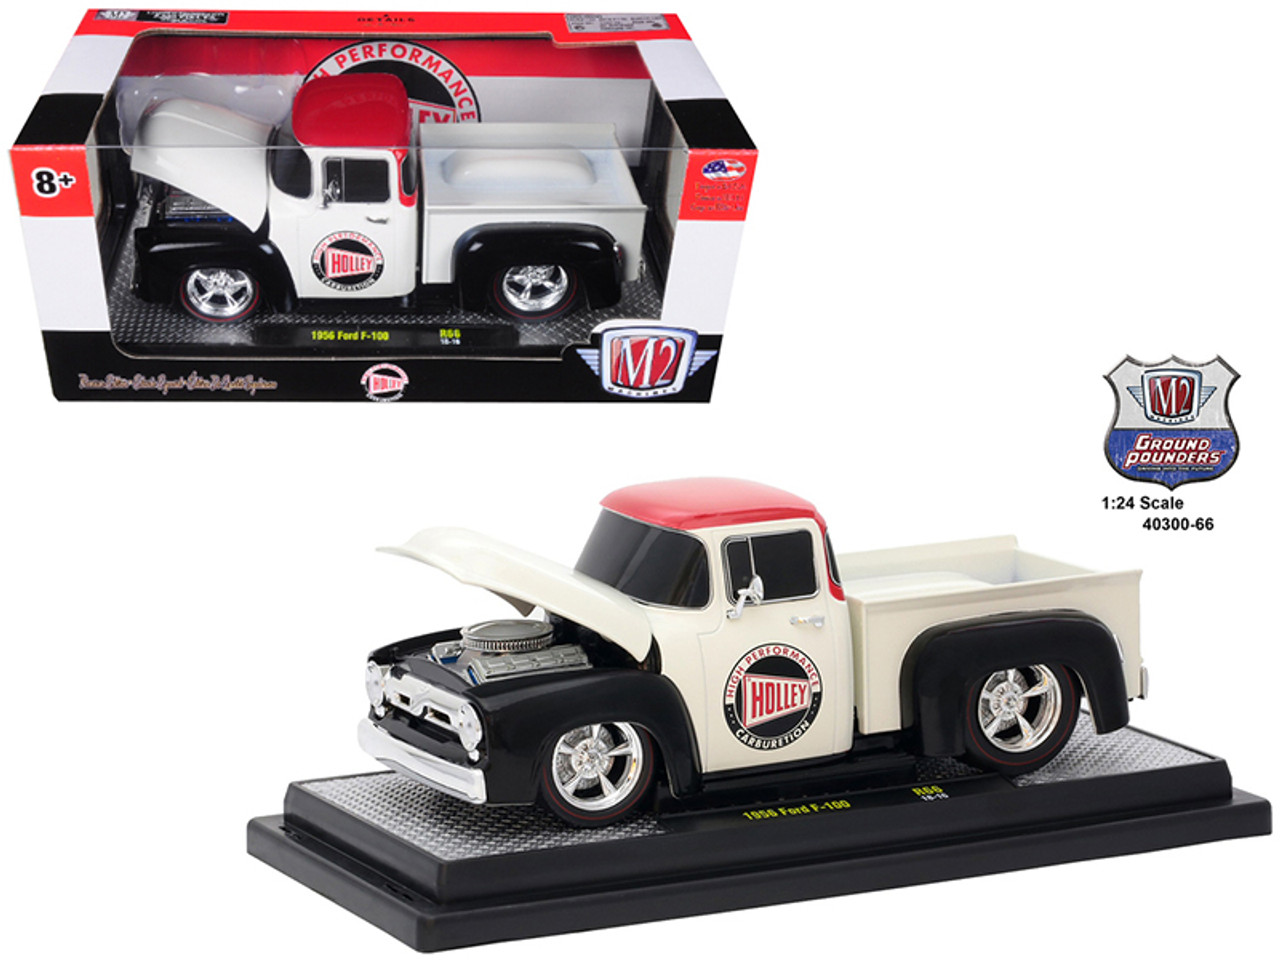 1956 Ford F-100 Pickup Truck "Holley" Limited Edition to 5,800 pieces Worldwide 1/24 Diecast Model Car by M2 Machines